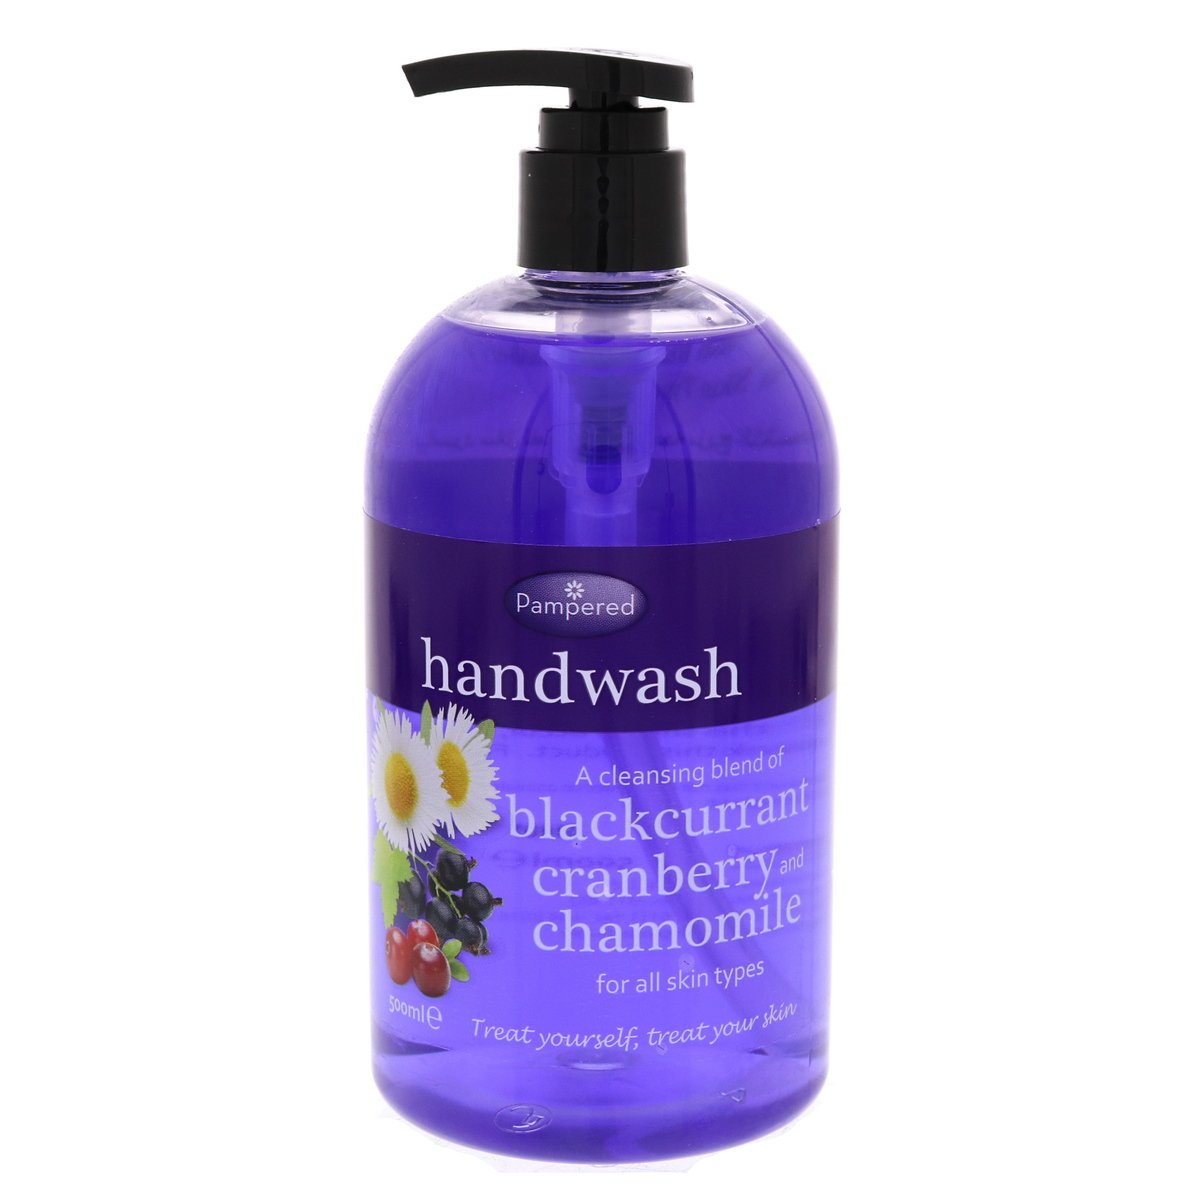 Pampered Hand Wash Balckcurrant, Cranberry & Chamomile 500 ml